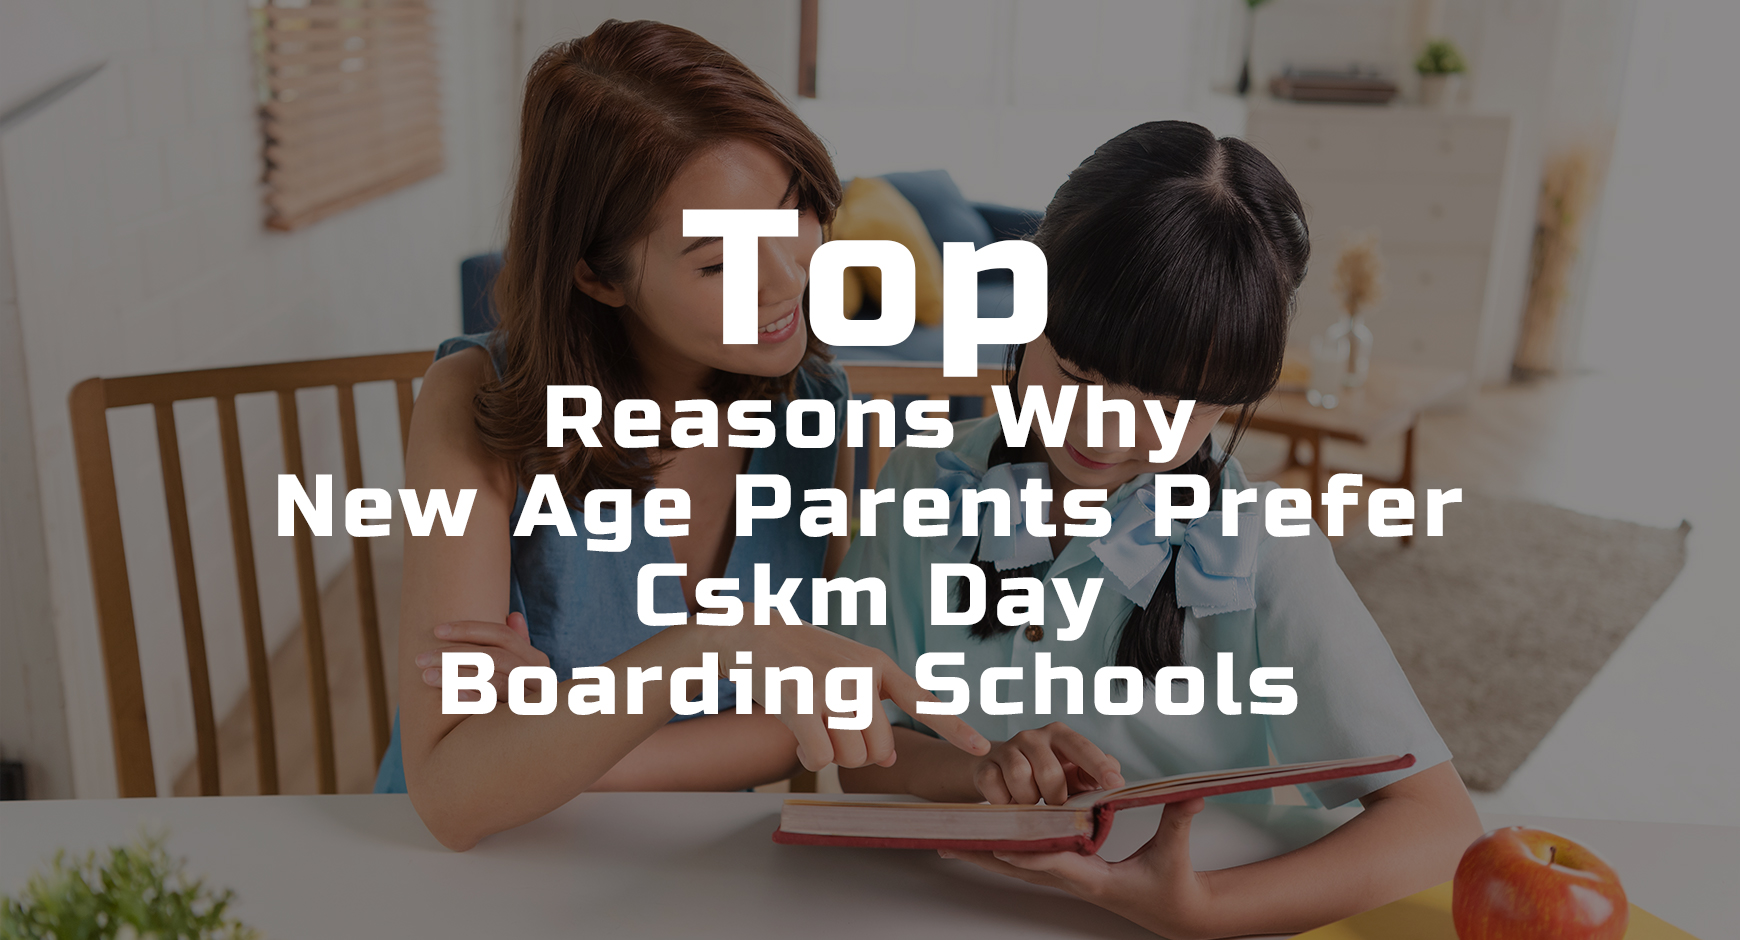 Top Reasons Why New Age Parents Prefer Cskm Day Boarding Schools